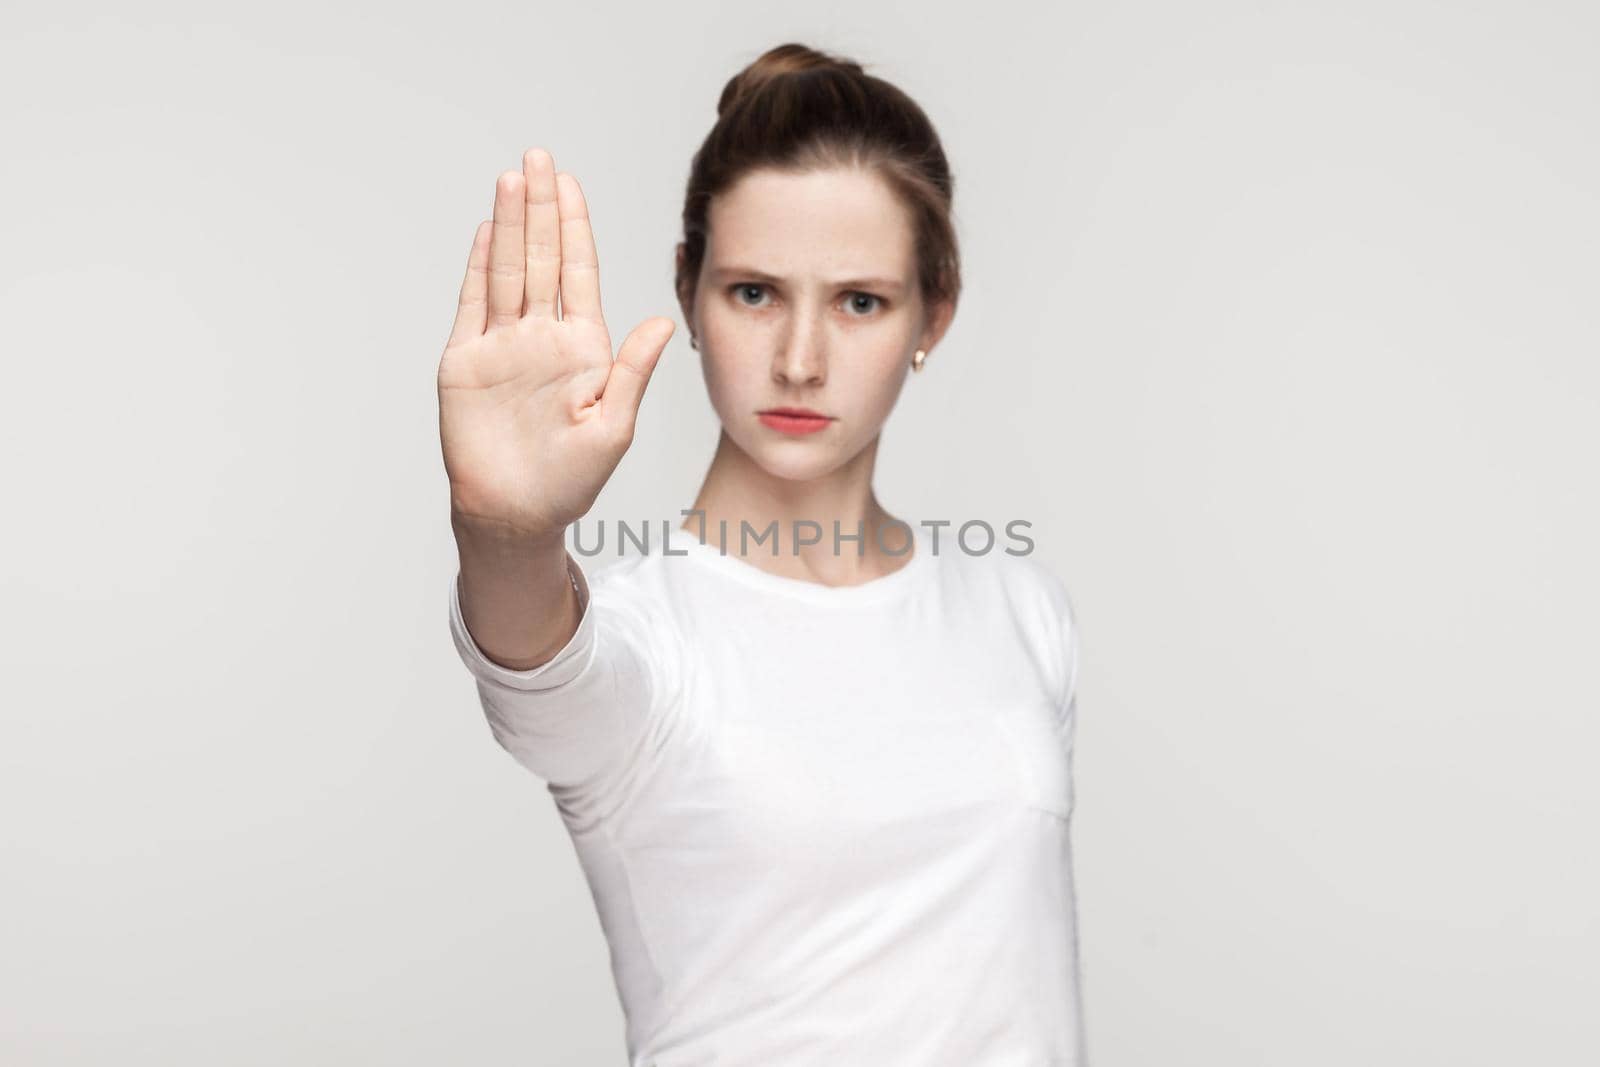 Stop sign. Focus on hand. Body language. Gray background